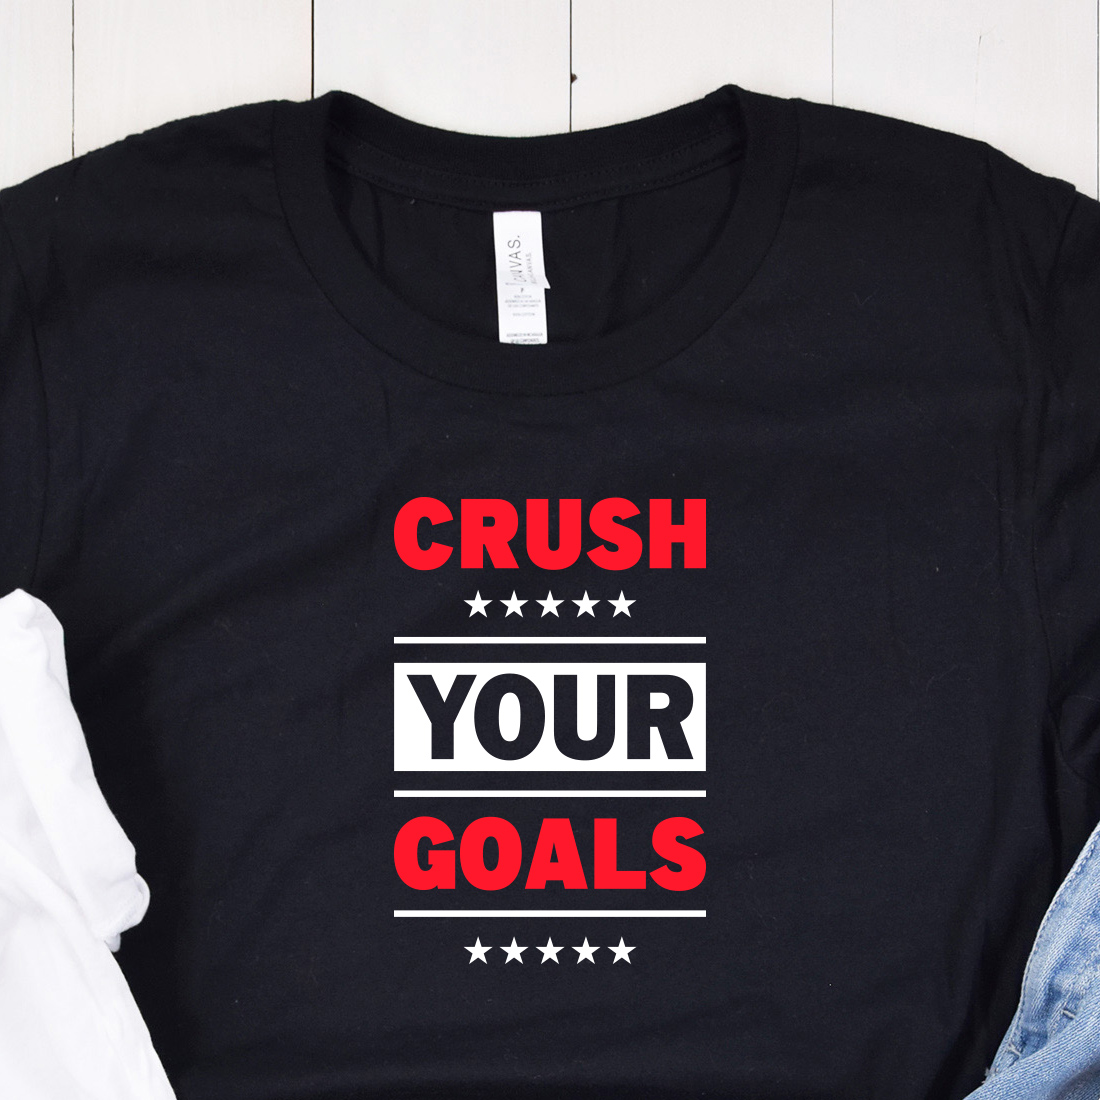 Crush Your Goals Typography T-Shirt Design mockup preview.